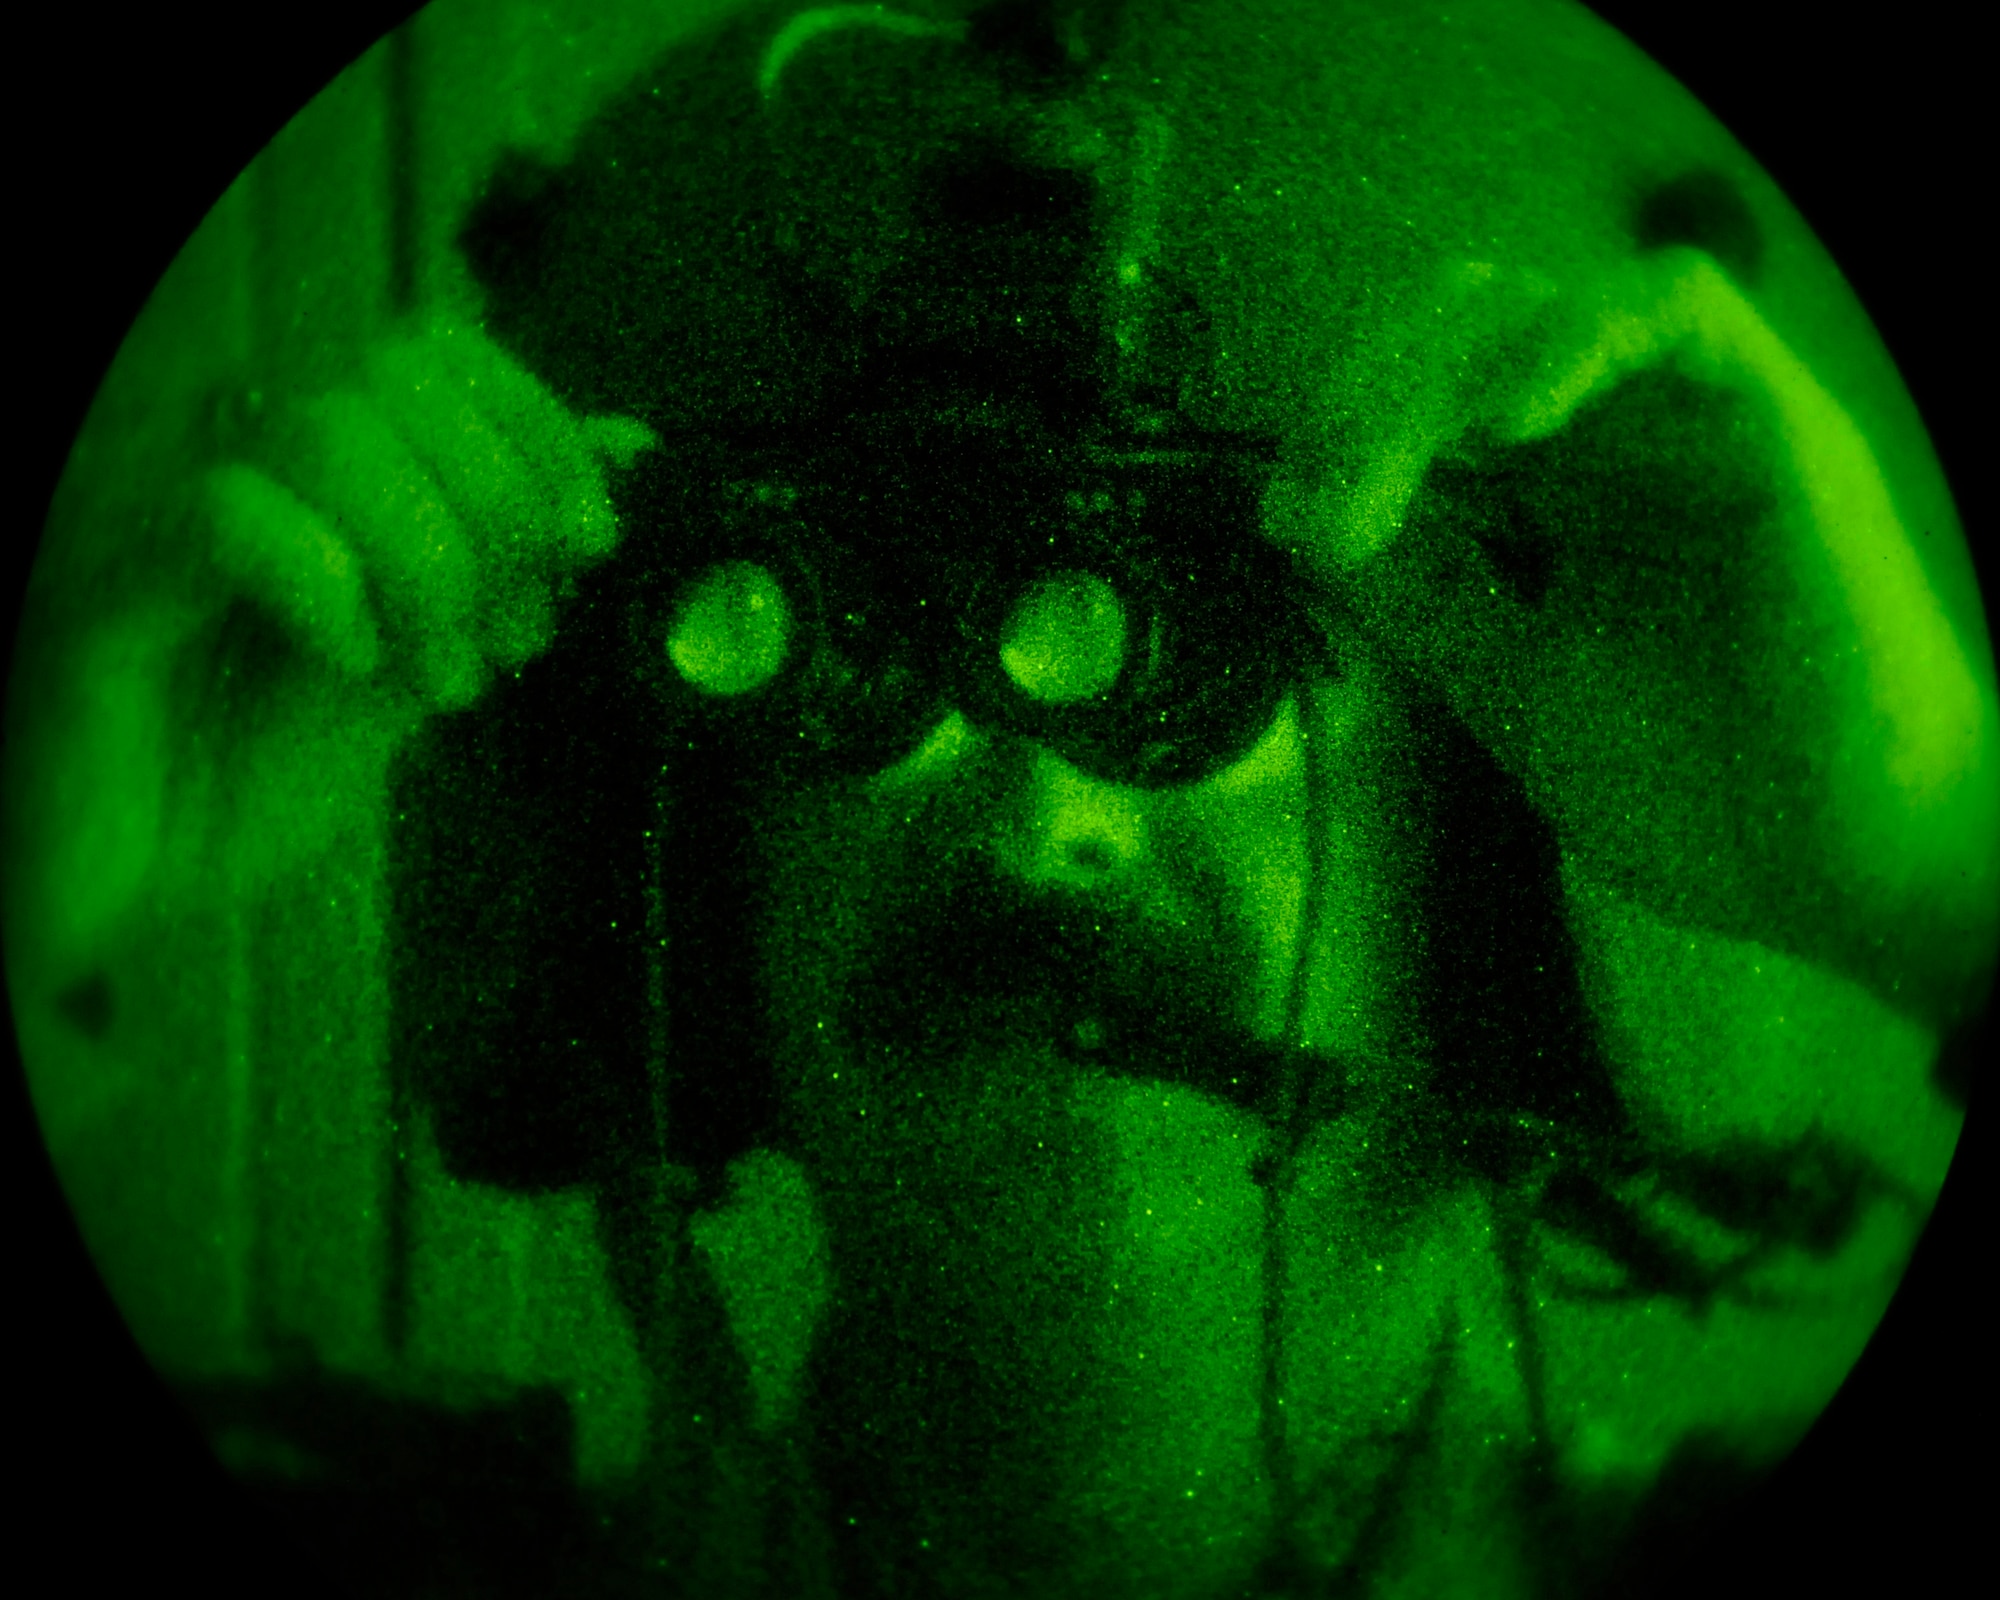 Iraqi Air Force Lt. Col. Ahmed M. Thwinee adjusts his night vision goggles before a training flight from Taji Air Base, Iraq, Sept. 11. Thwinee is second commander and an instructor pilot with the Iraqi air force's 15th Squadron. American Airmen with the 770th Air Expeditionary Advisory Squadron accompanied the Iraqi aircrew on the flight. (U.S. Air Force photo/Staff Sgt. Paul Villanueva II)